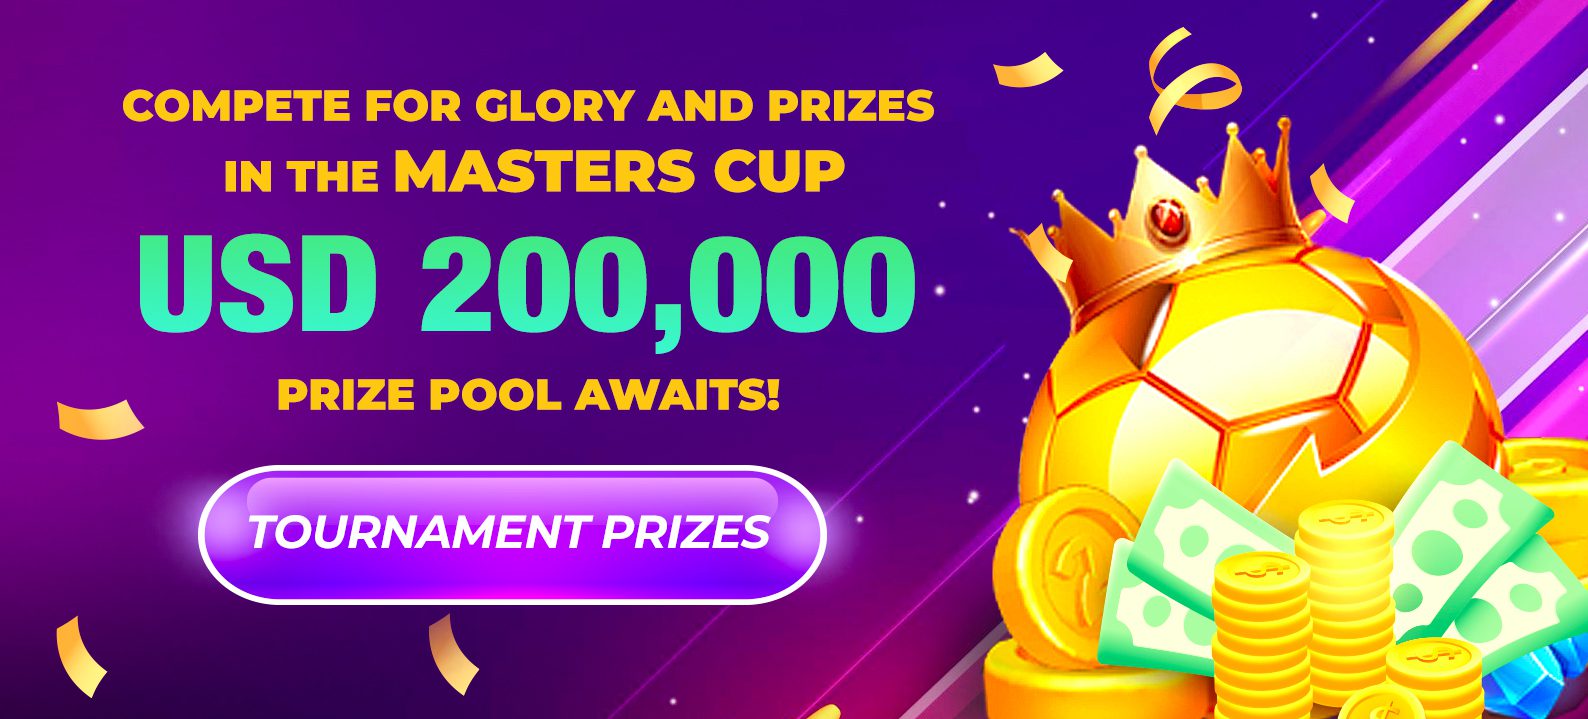 Compete for Glory and Prizes in the Masters Cup USD 200,000 Prize Pool Awaits